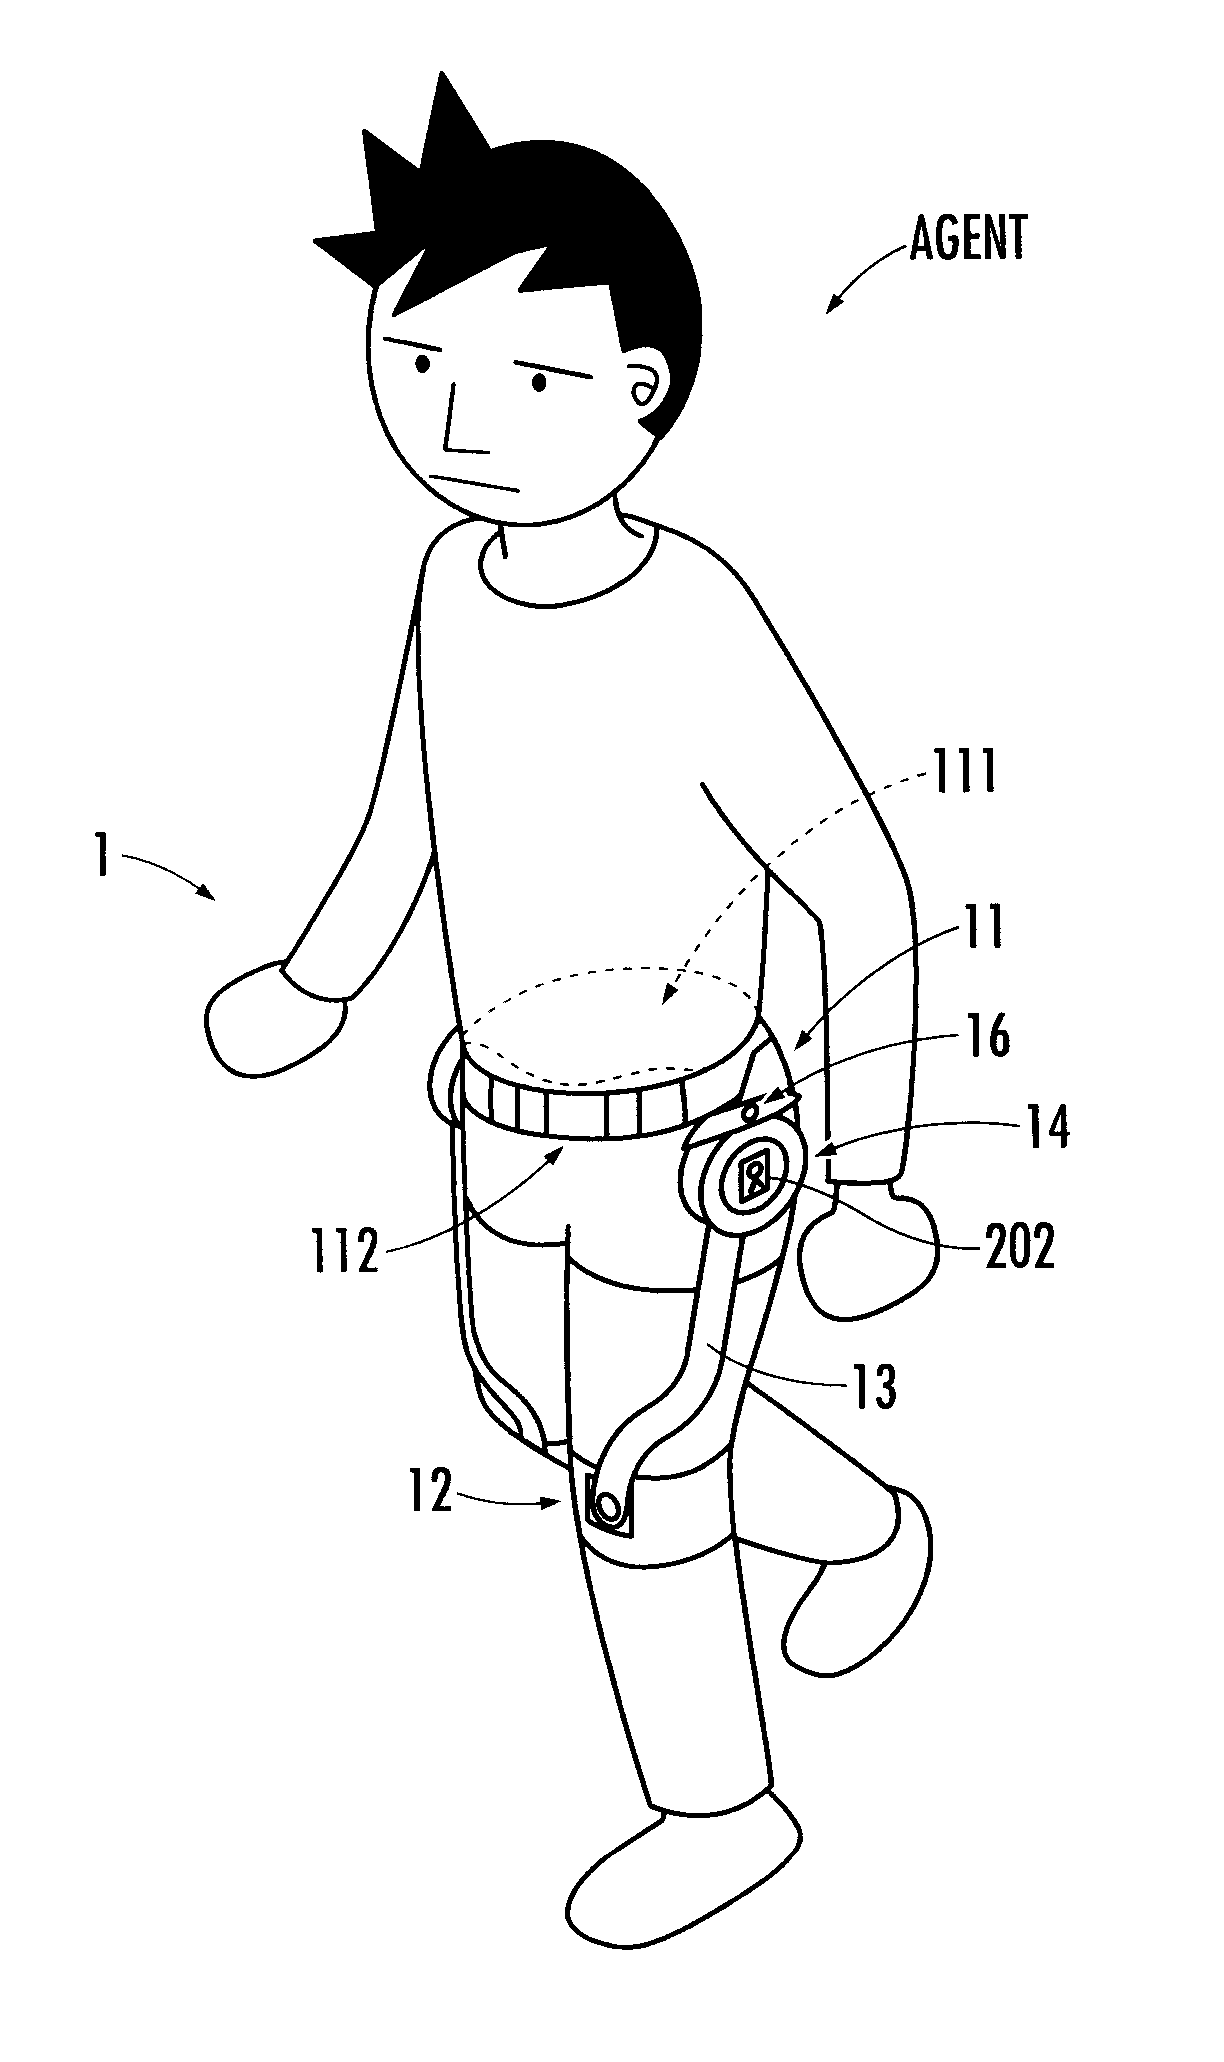 Walking motion assisting device